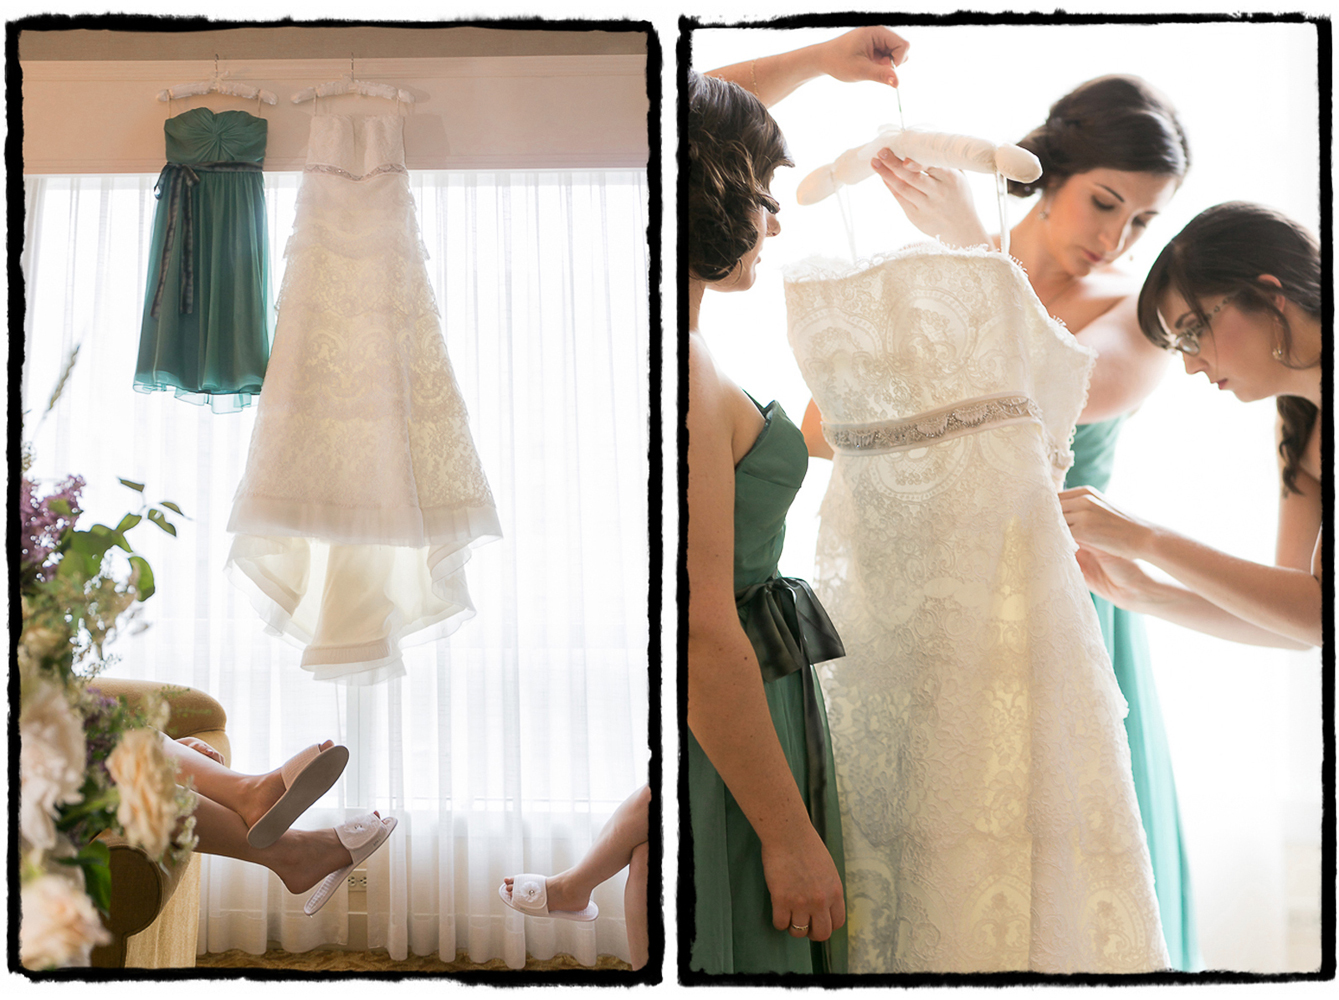 Alexandra's bridesmaids prepare the dress for her to step into for her wedding at The Palm House..